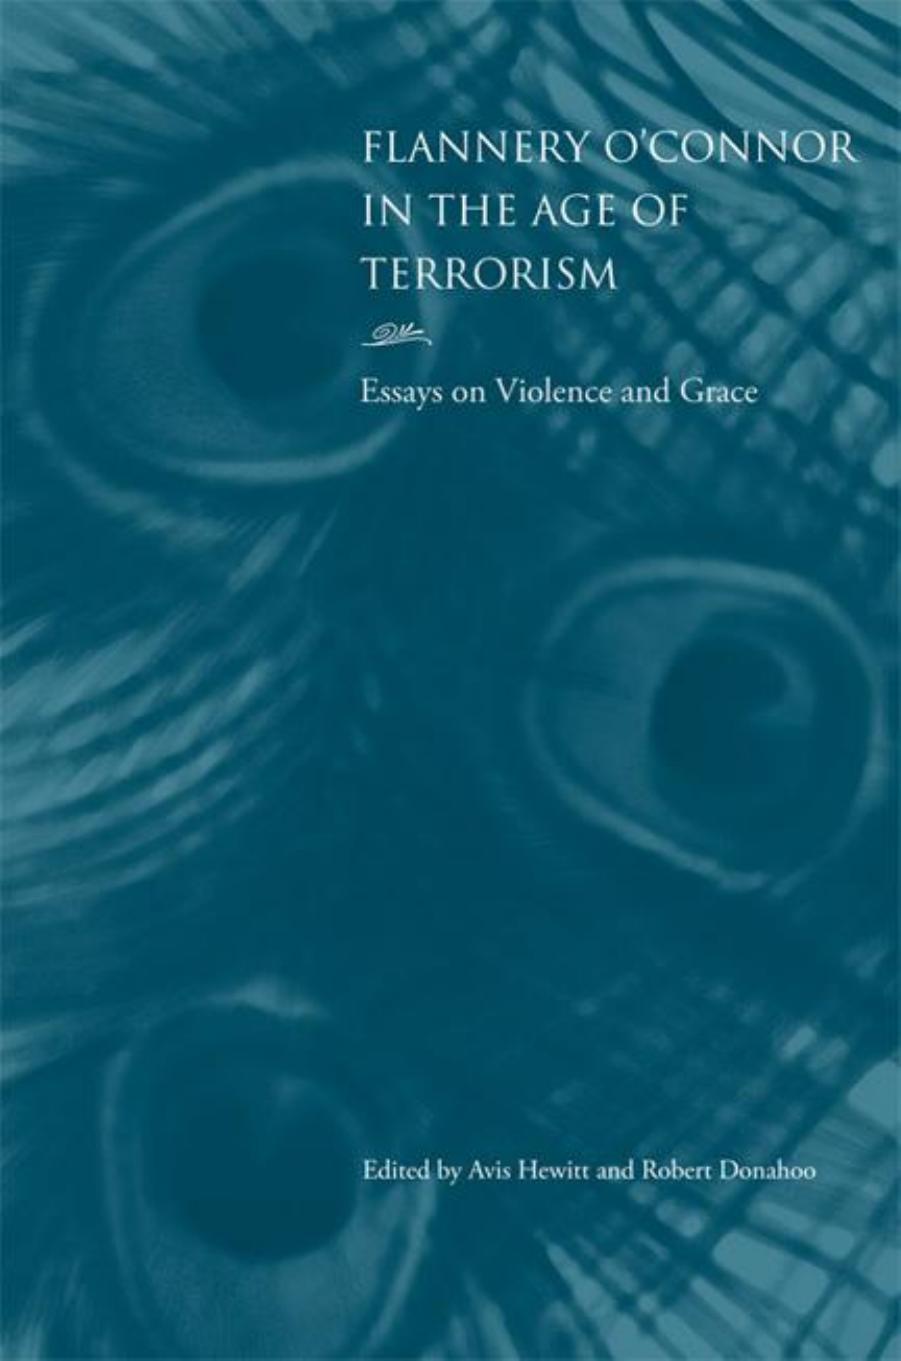 Flannery o'Connor in the Age of Terrorism : Essays on Violence and Grace by Avis Hewitt; Robert Donahoo